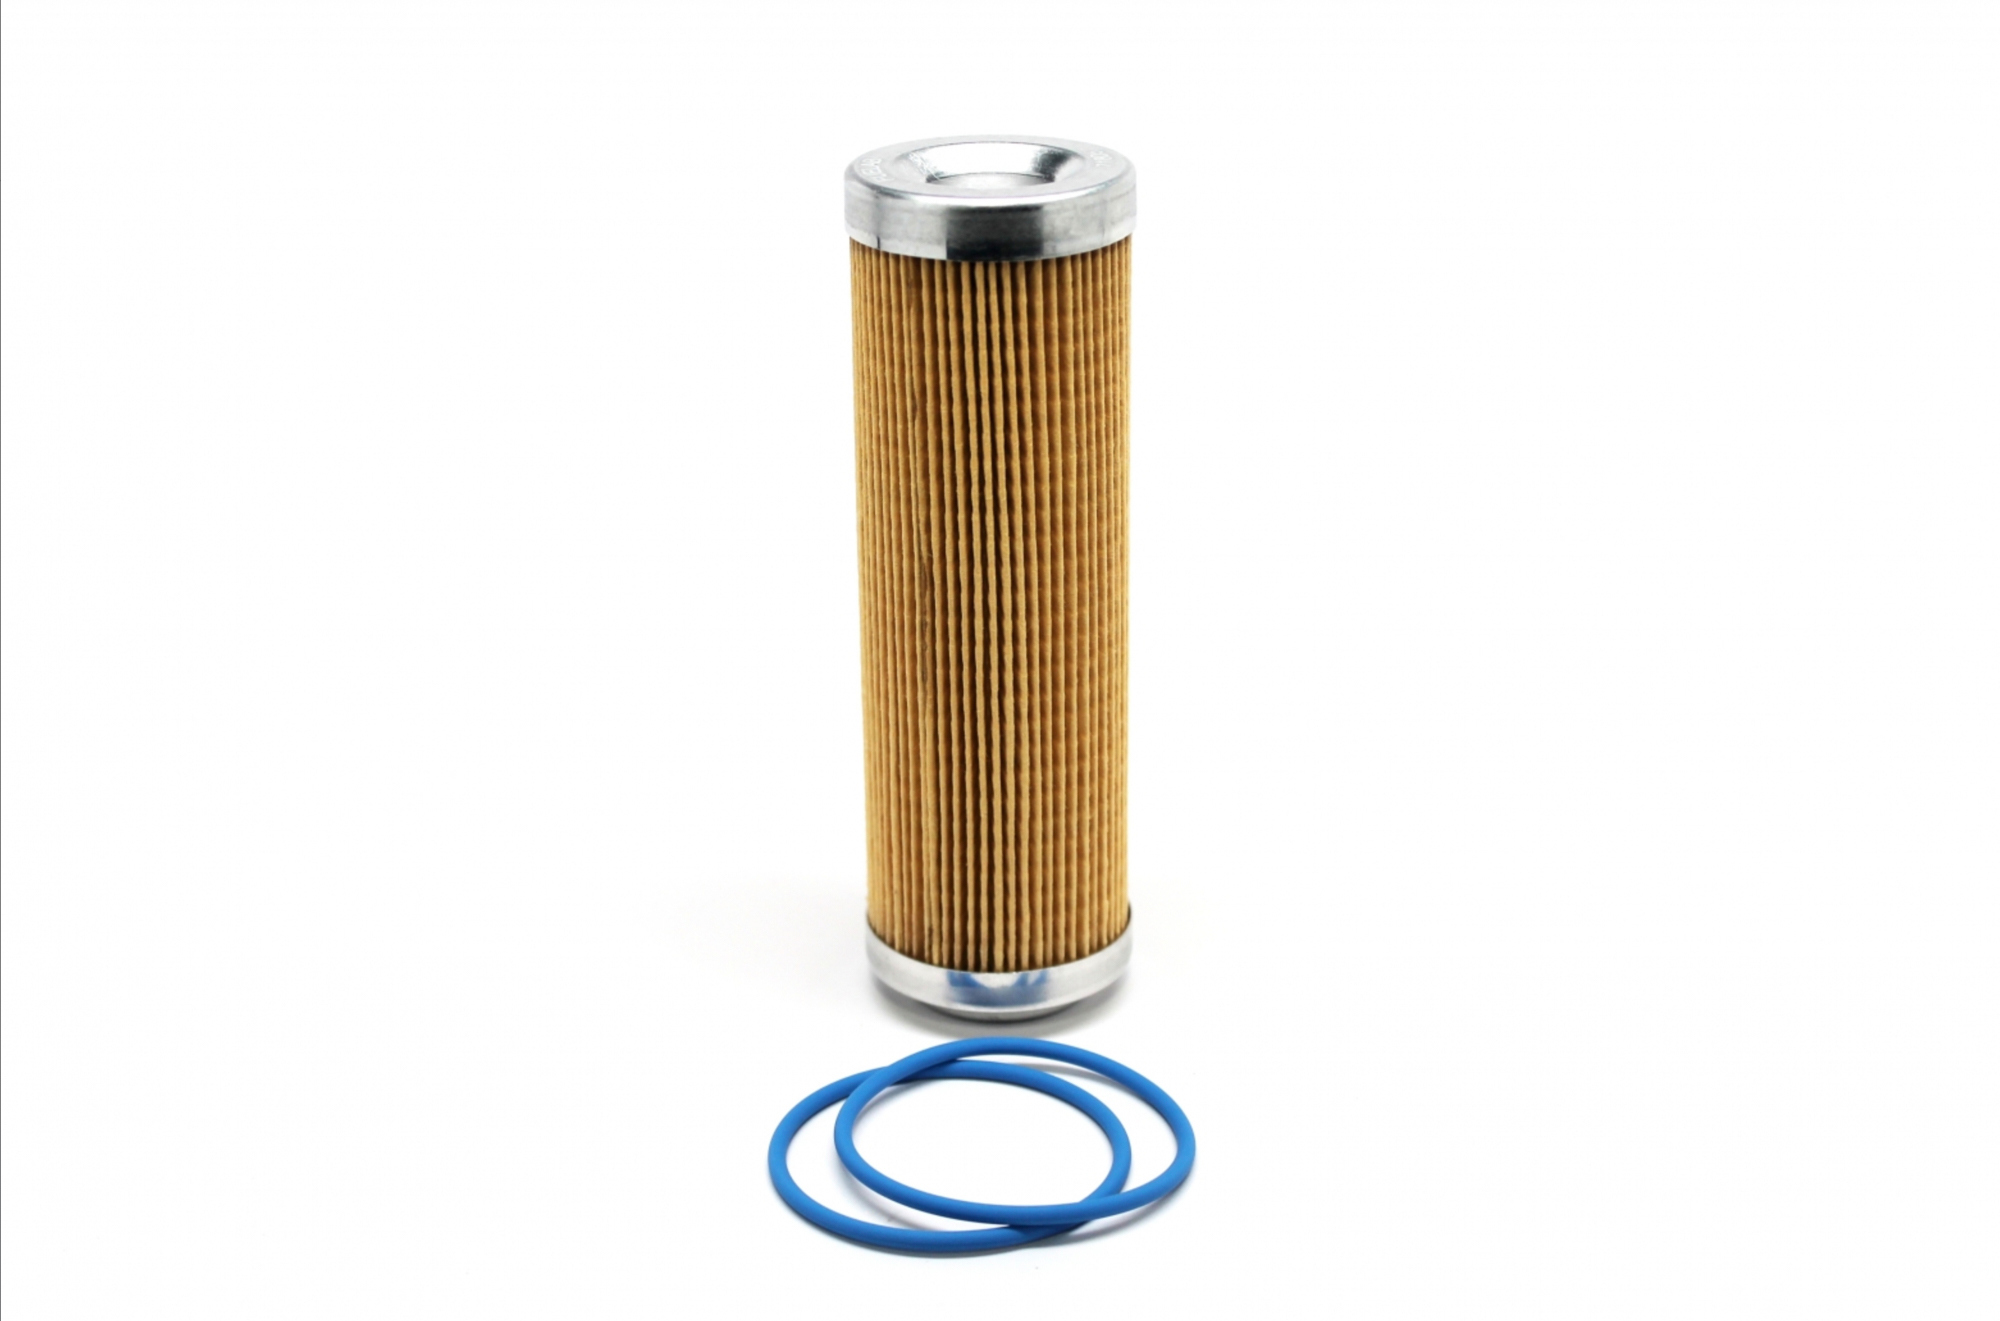 FueLab 71805 Fuel Filter Element, 10 Micron, 5 in Long, Paper Element, Fuelab Filters, Each